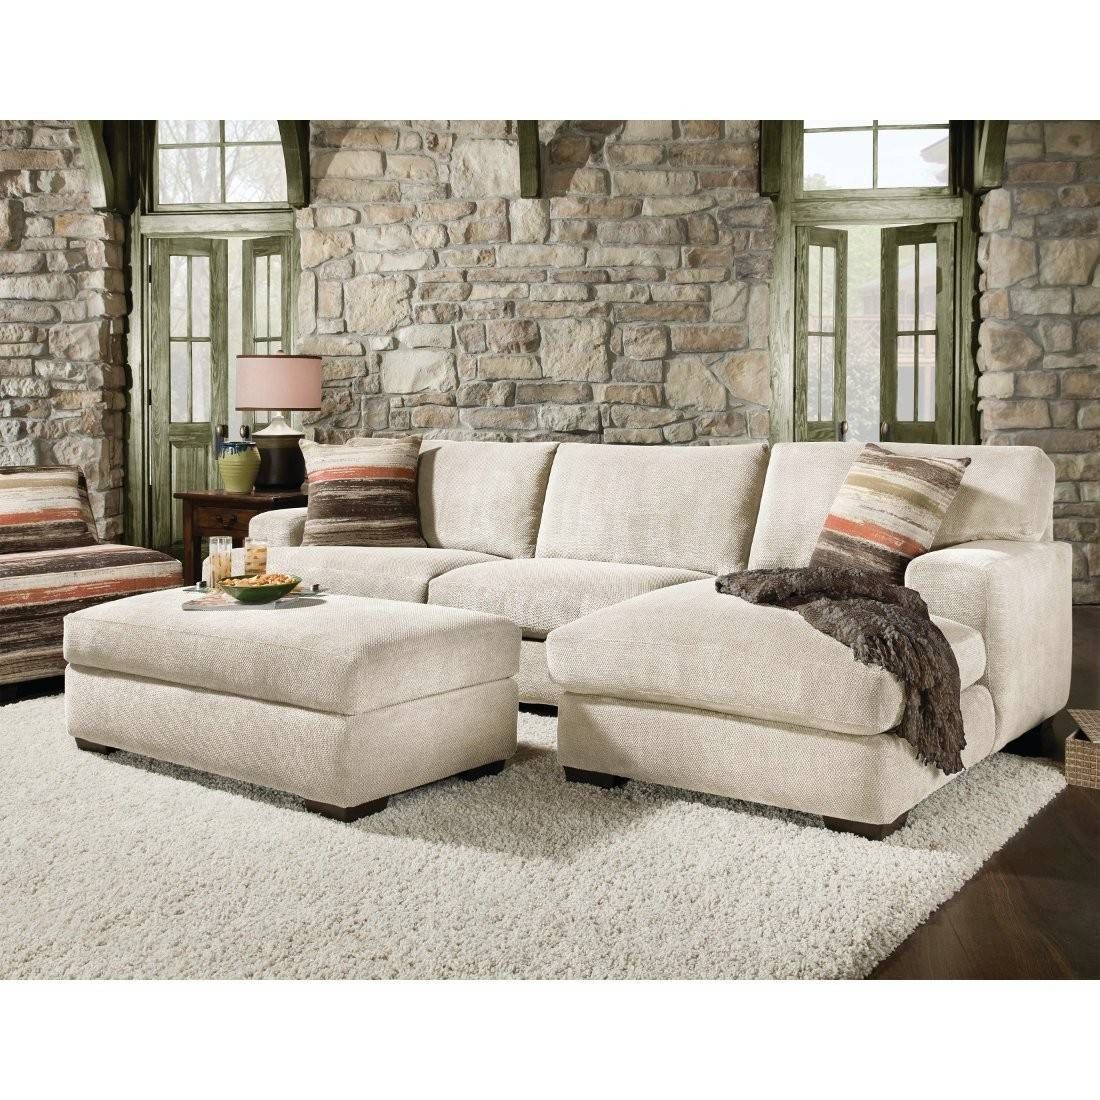 Cozy Sectional Sofa With Chaise And Ottoman 29 About Remodel Down Pertaining To Cozy Sectional Sofas (View 5 of 30)